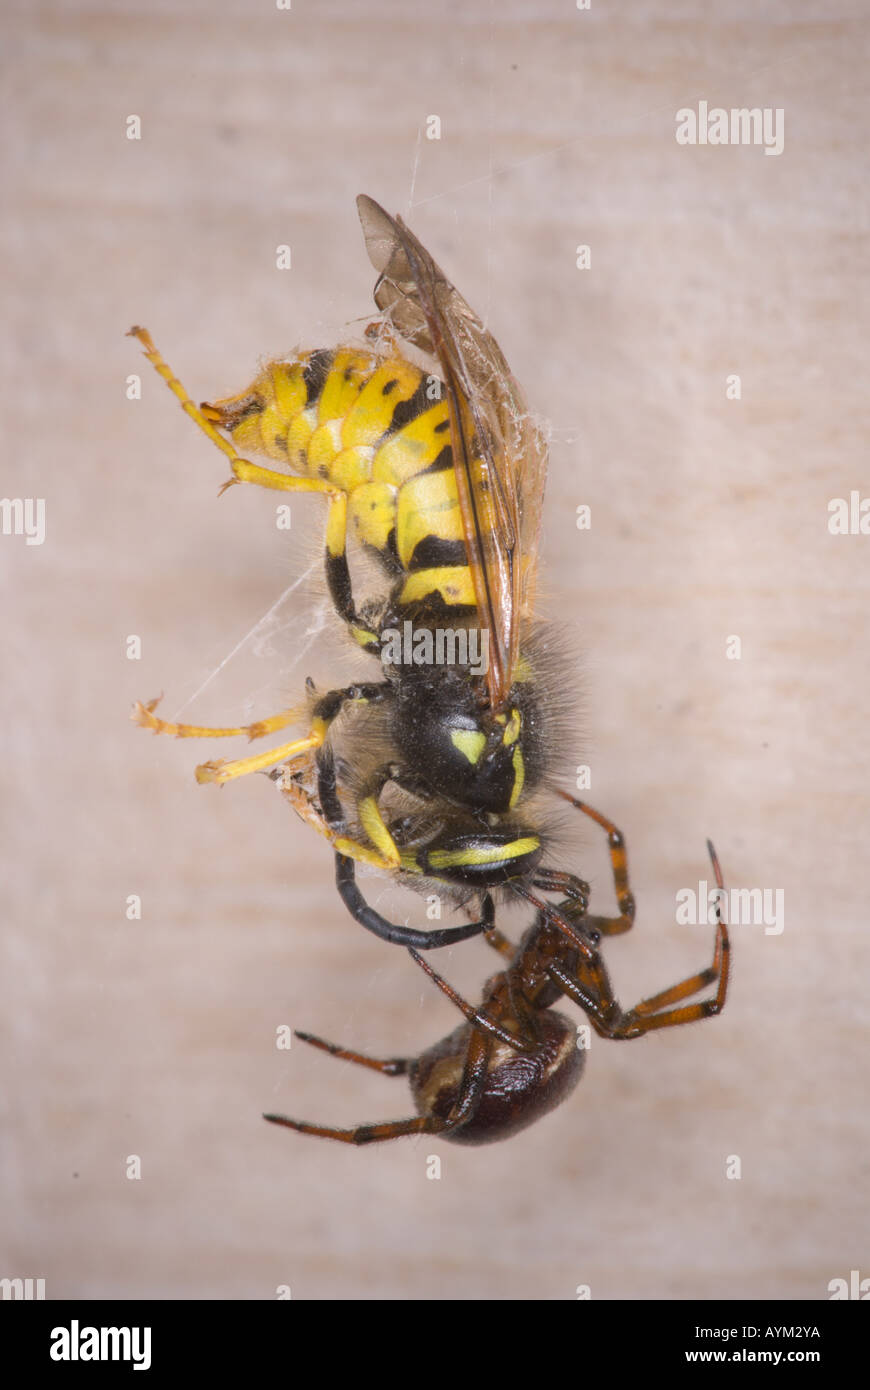 A small house spider snares and subdues a large wasp as its prey on a window shutter Scotland UK Stock Photo